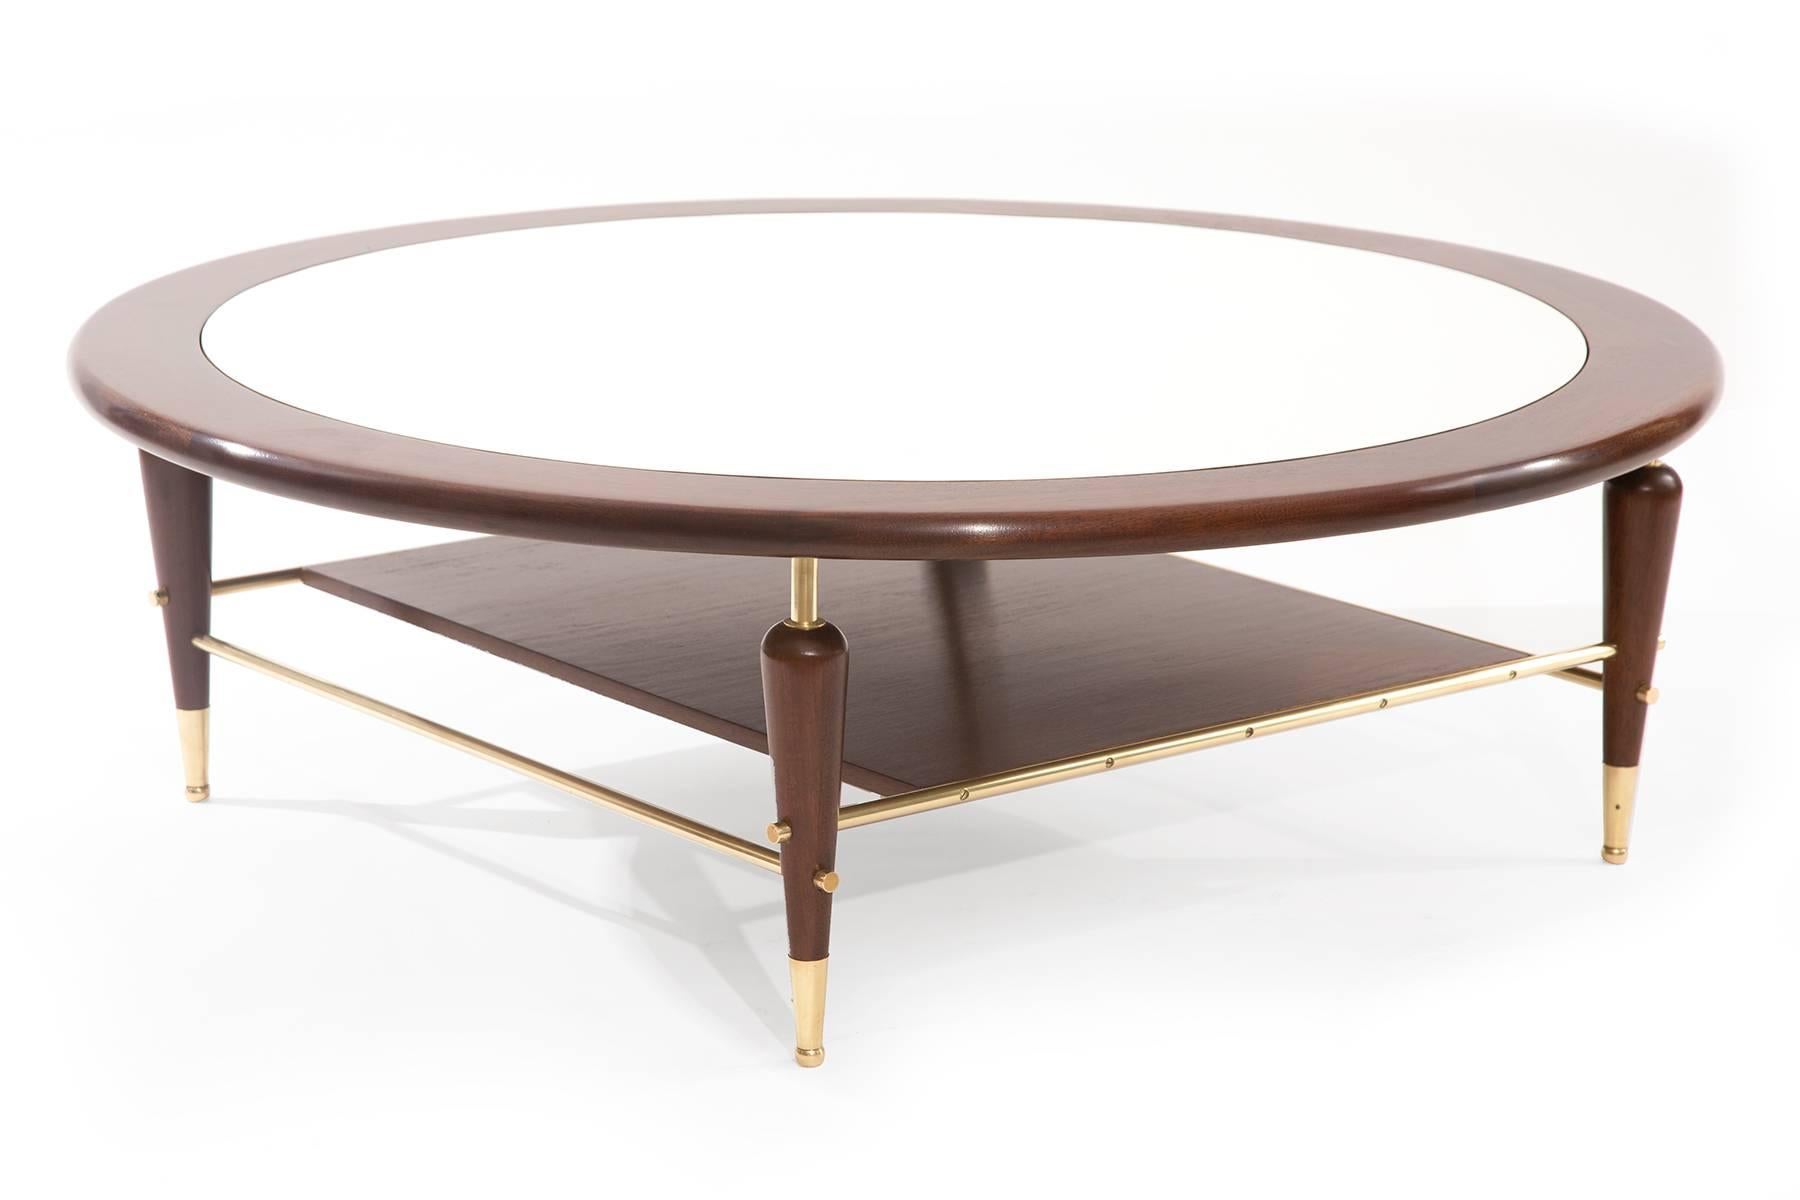 Fabulous walnut laminate and brass cocktail table, circa mid-1960s. This example has an inset white laminate top with solid walnut frame and legs. It has recently been impeccably refinished and the brass polished.